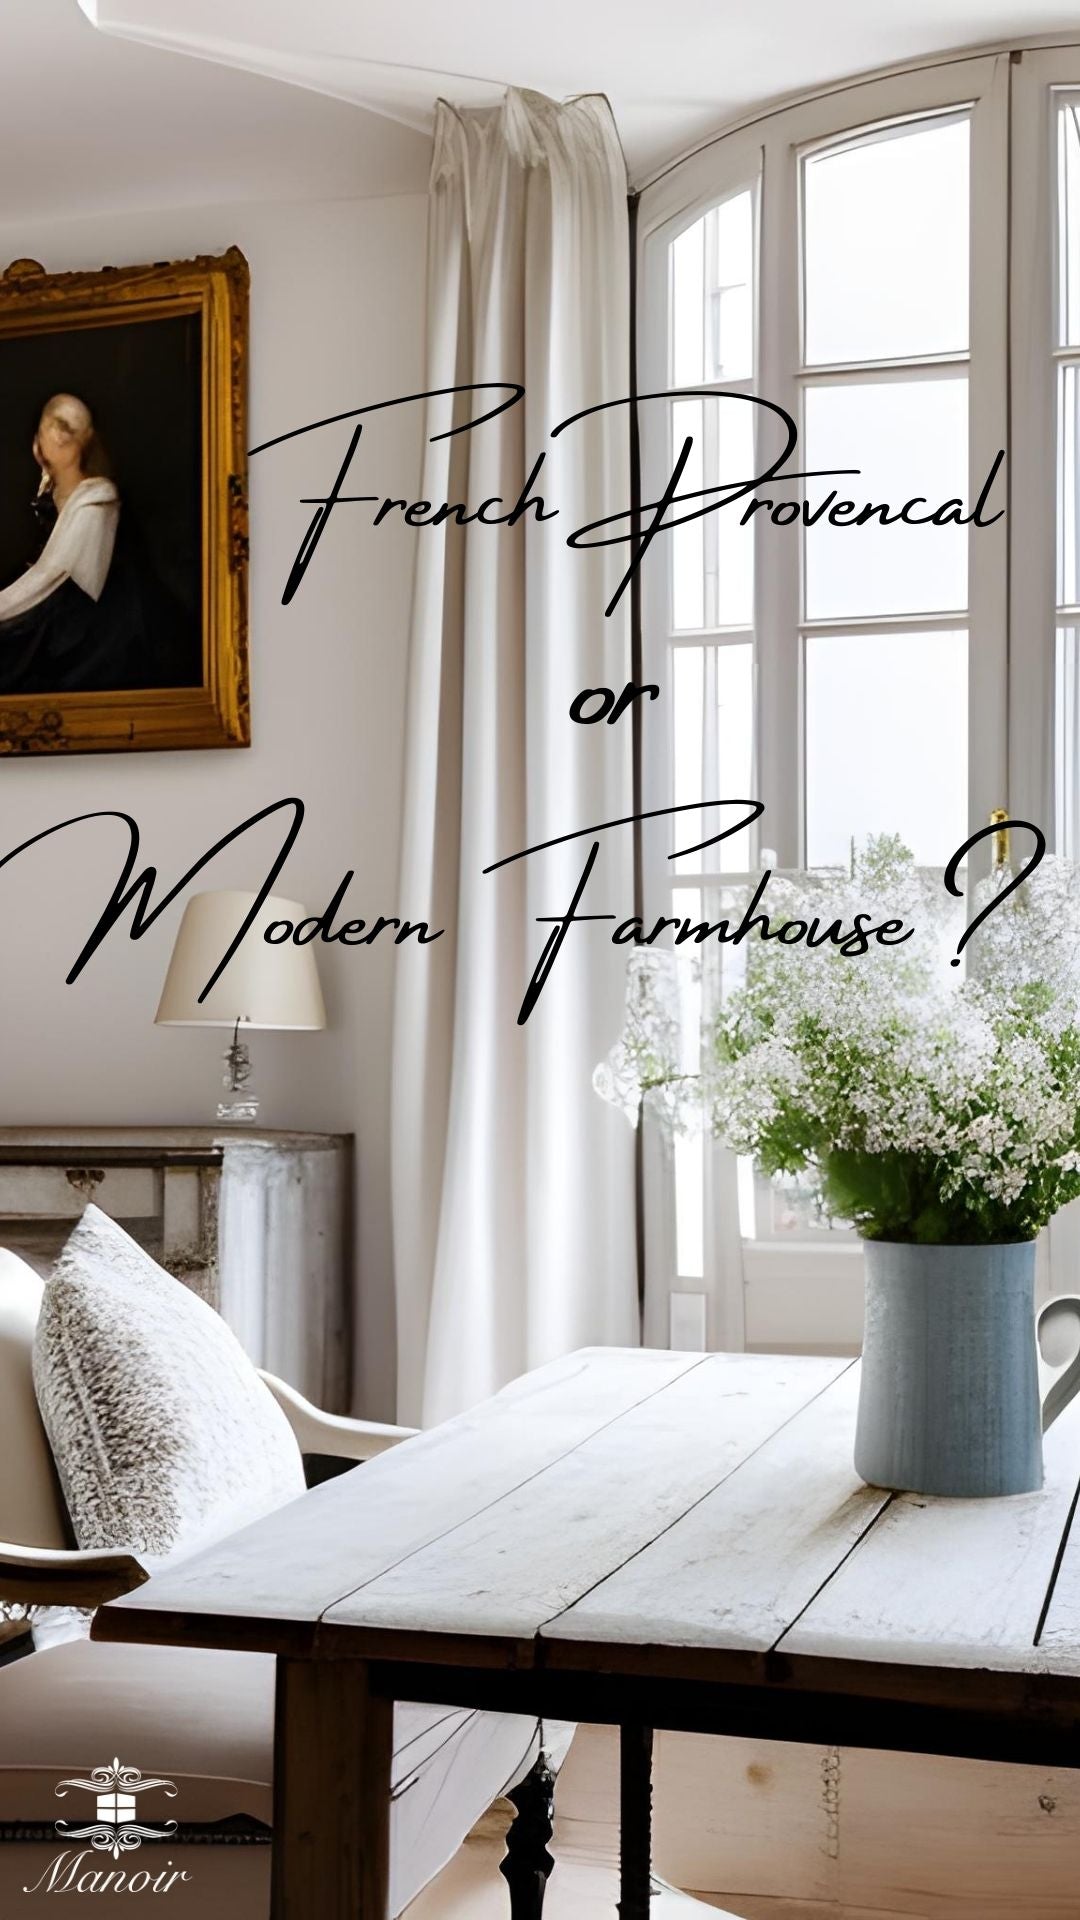 Modern Farmhouse vs. French Provencal Style: Understanding the Difference